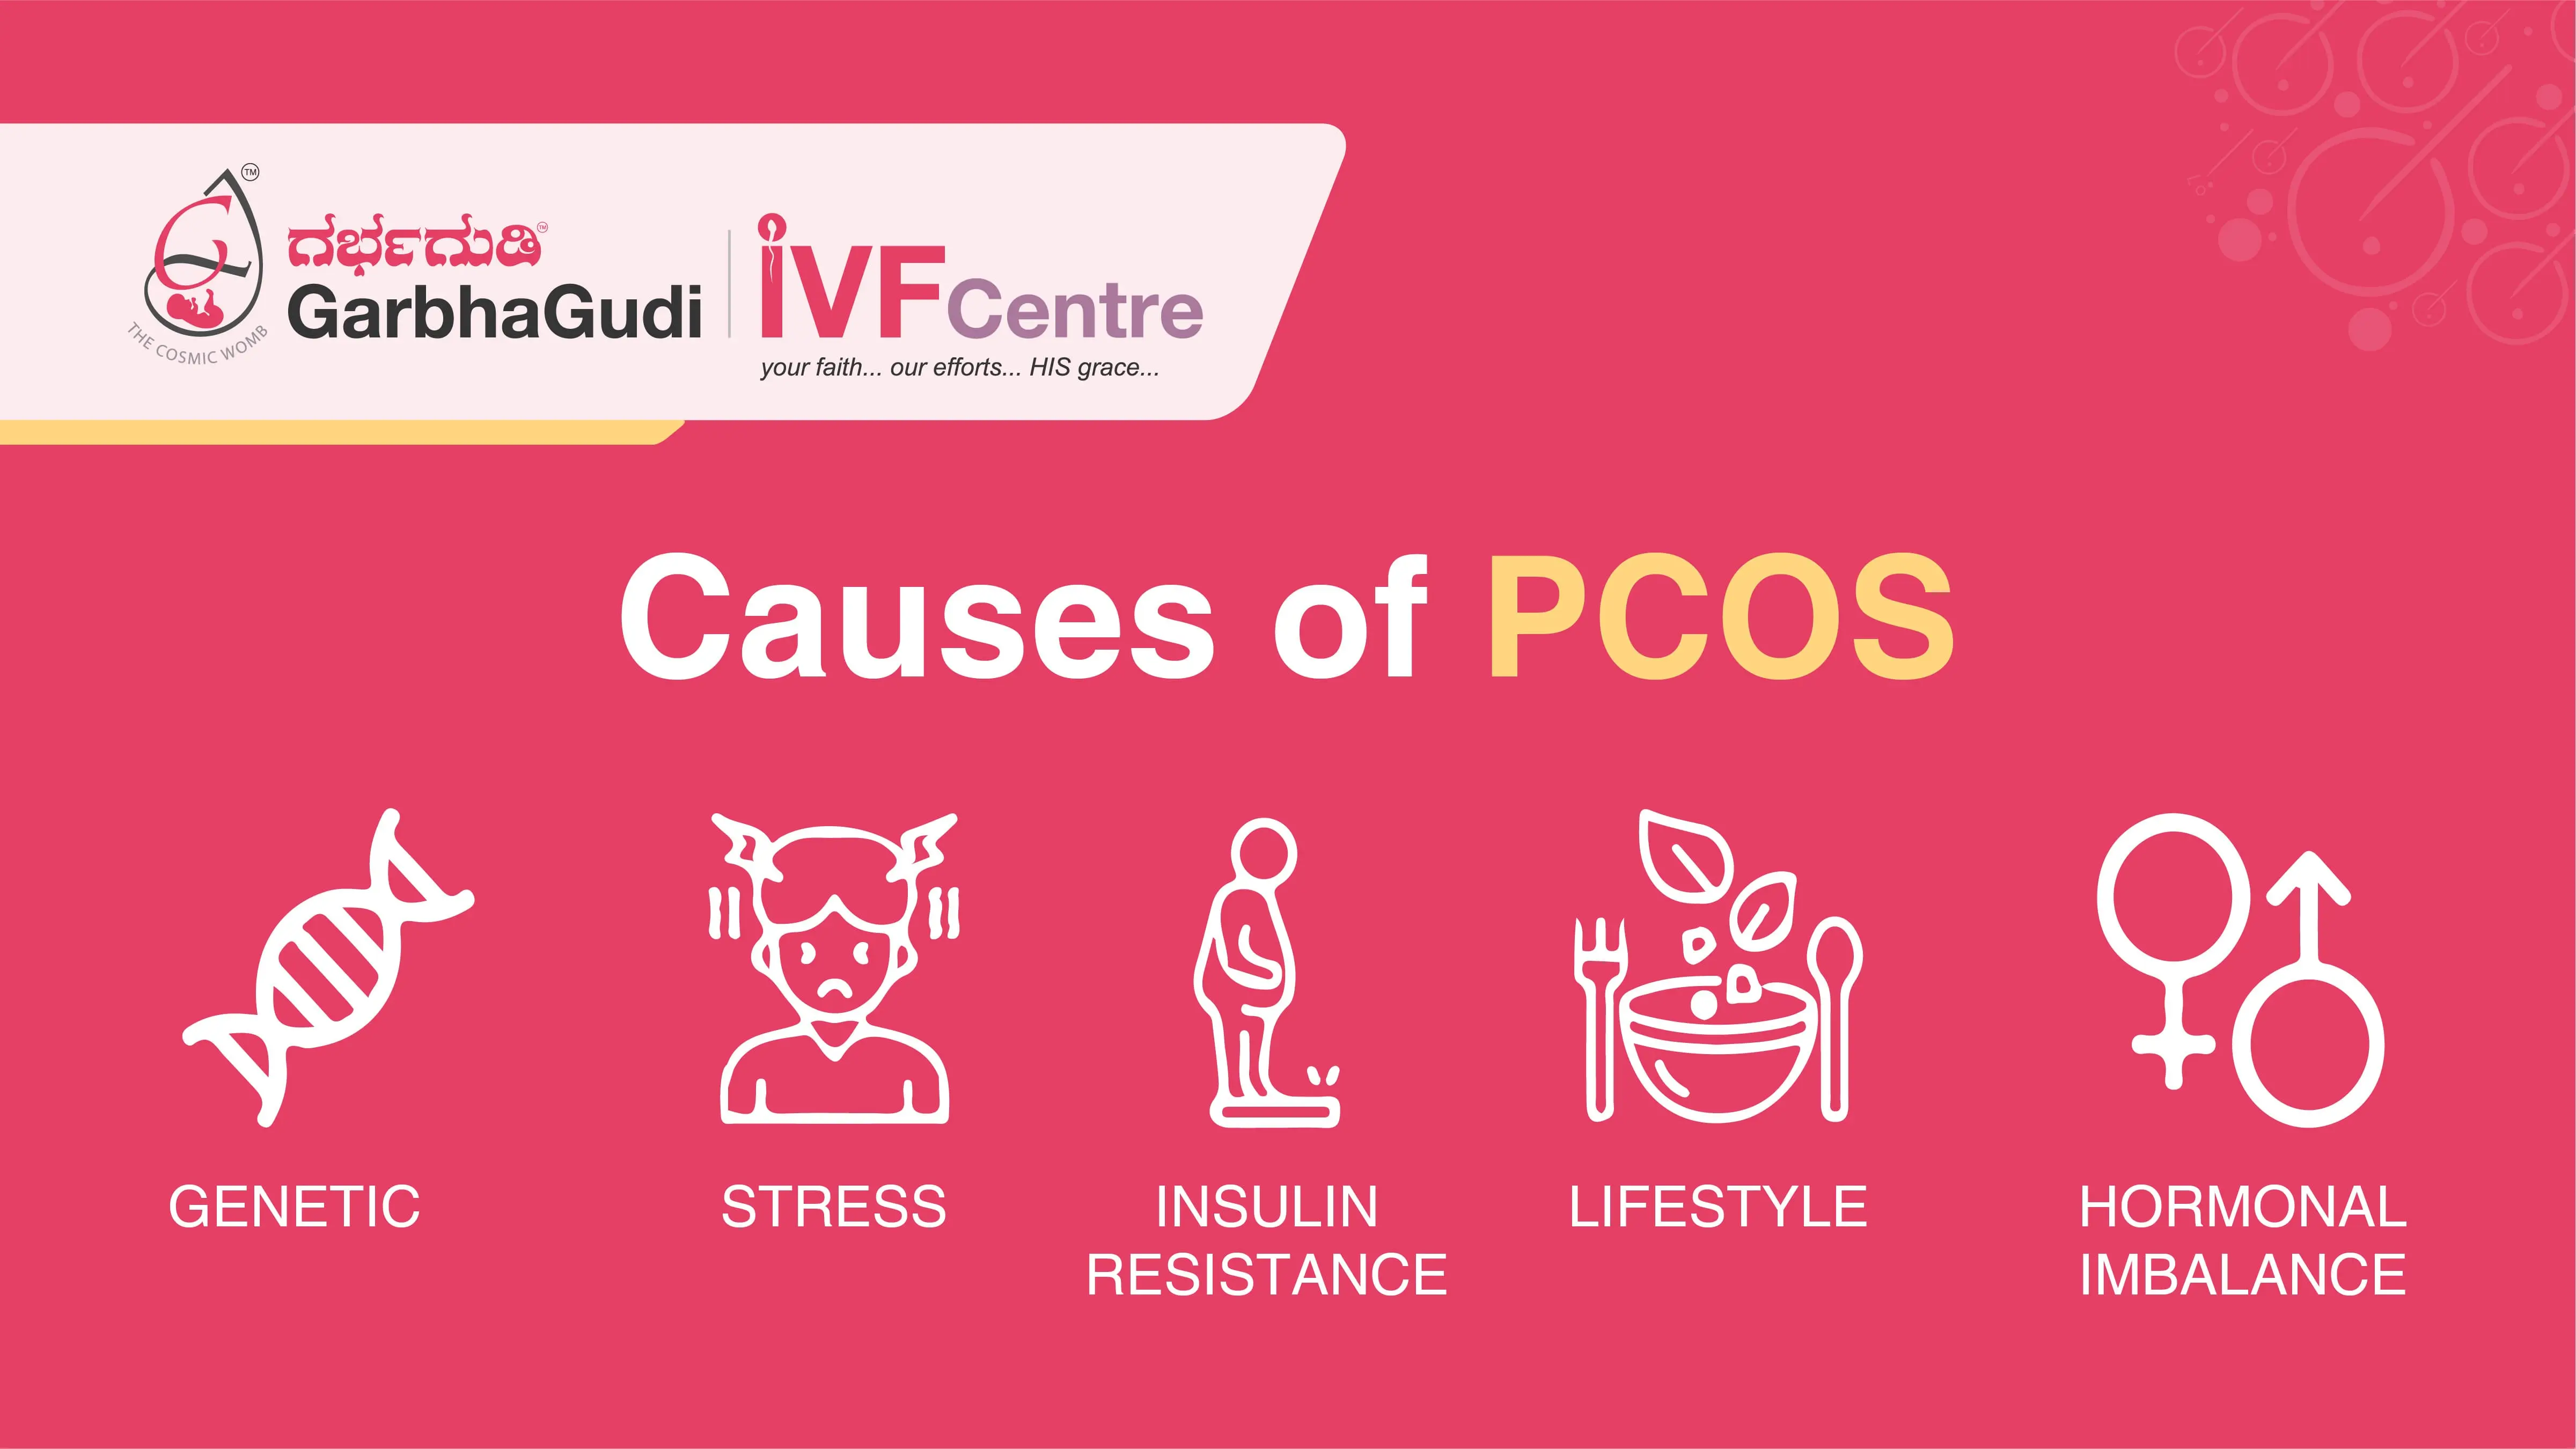 Causes of PCOS